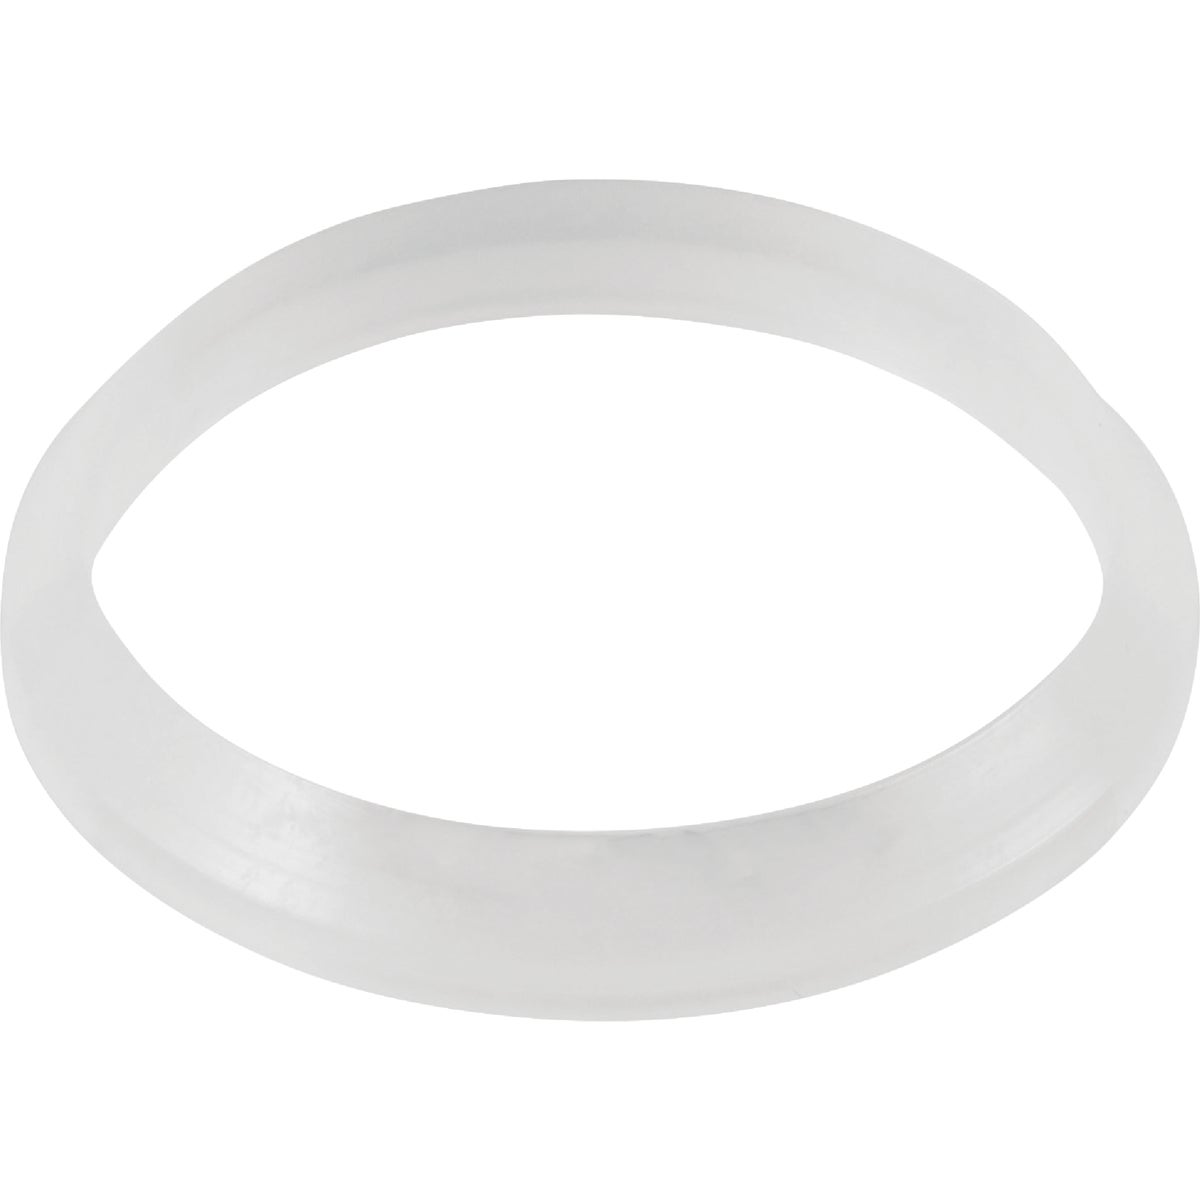 Item 448545, Poly slip-joint washers designed for use in tubular drain applications.